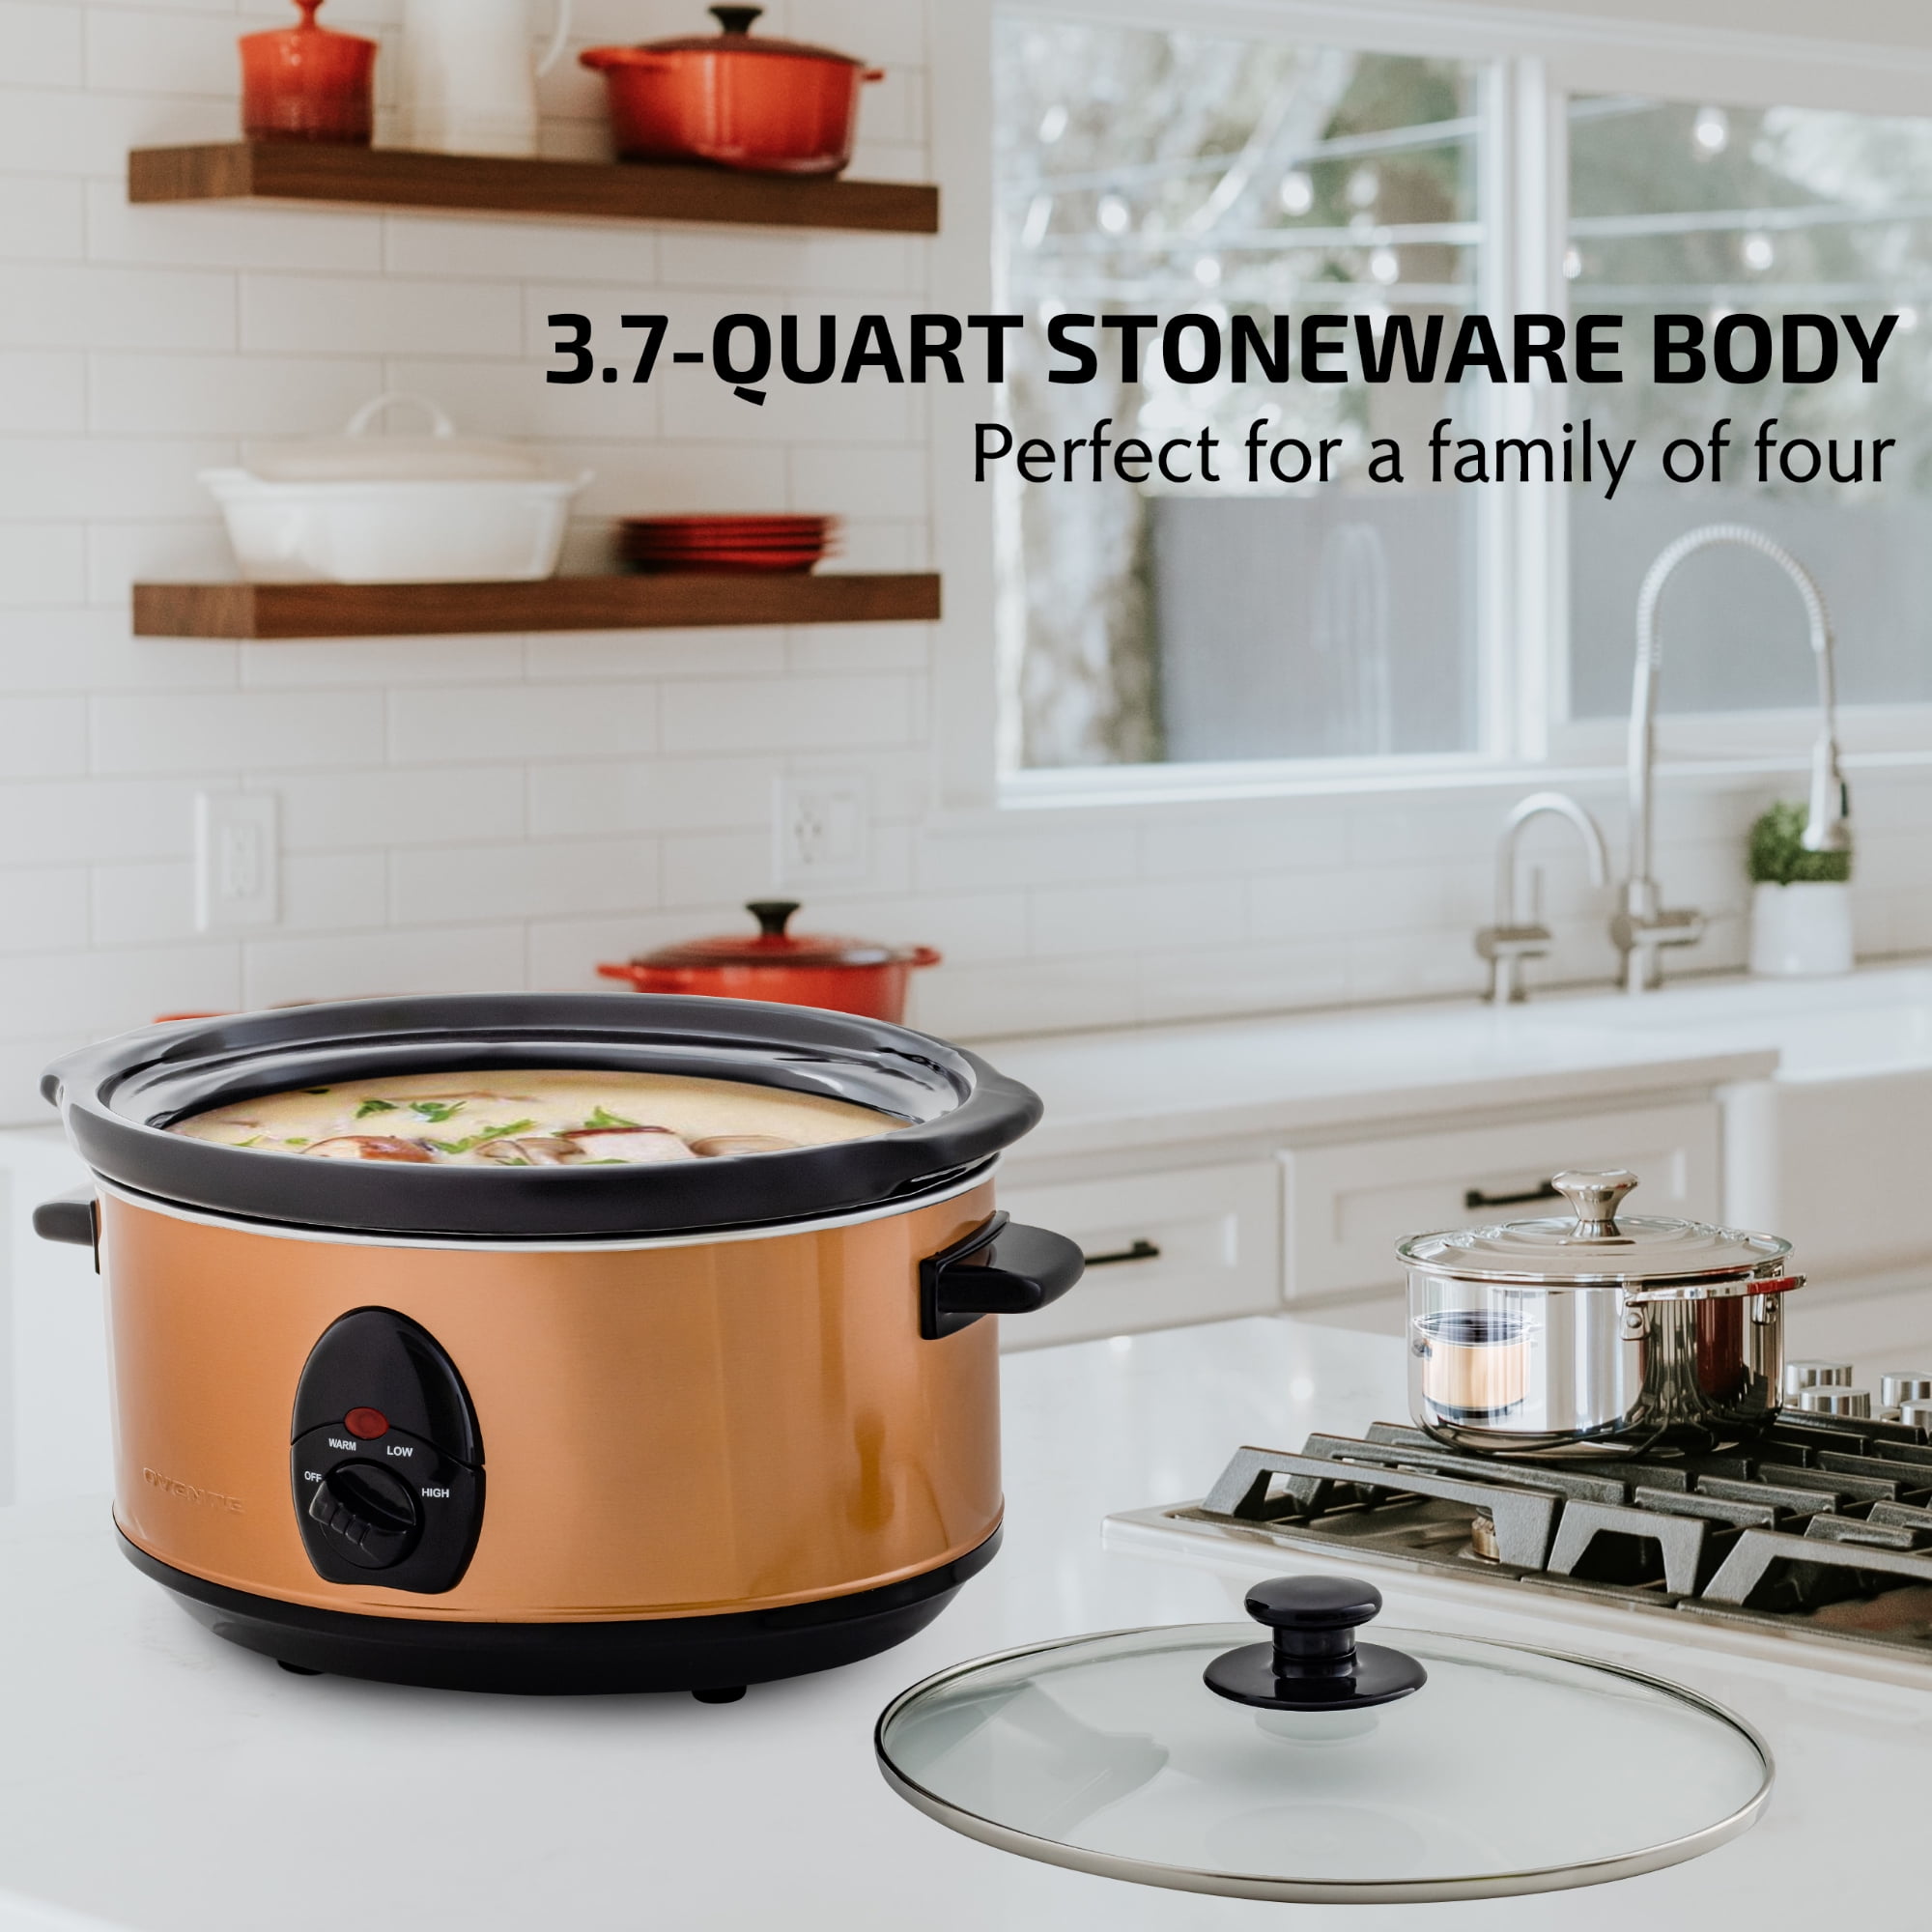 spoonlemon Slow Cooker Programmable, 11-in-1 Multi Cooker Electric, 6.5  Quart 1500W Nonstick Inner Pot with Timer, Temp Control & Dishwasher Safe